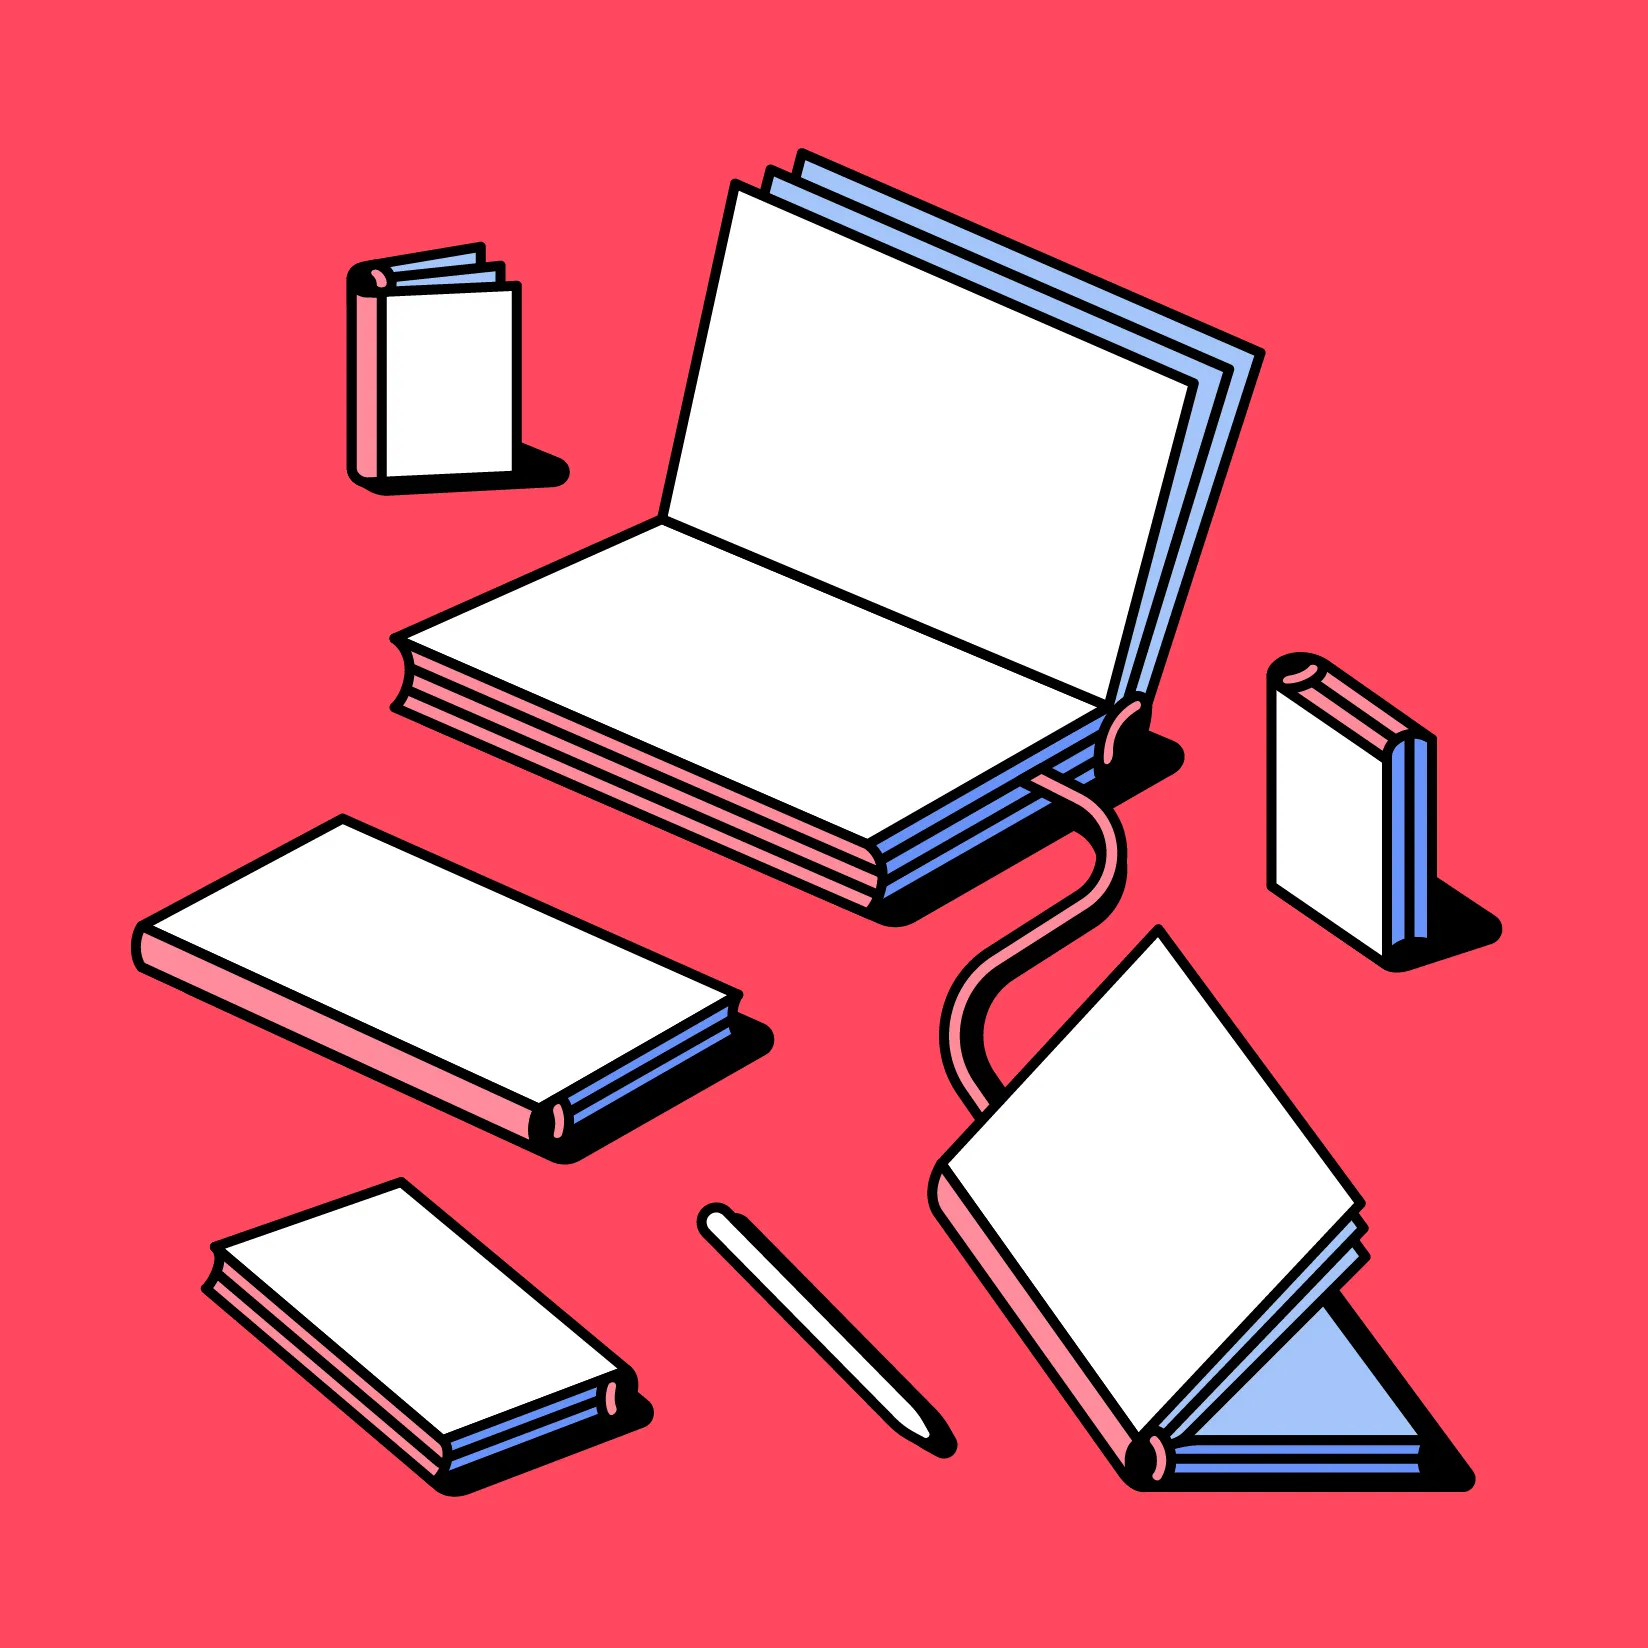 A stylized illustration of an open book made to look like an open laptop, surrounded by several closed books and a pen, all set against a vibrant red background.